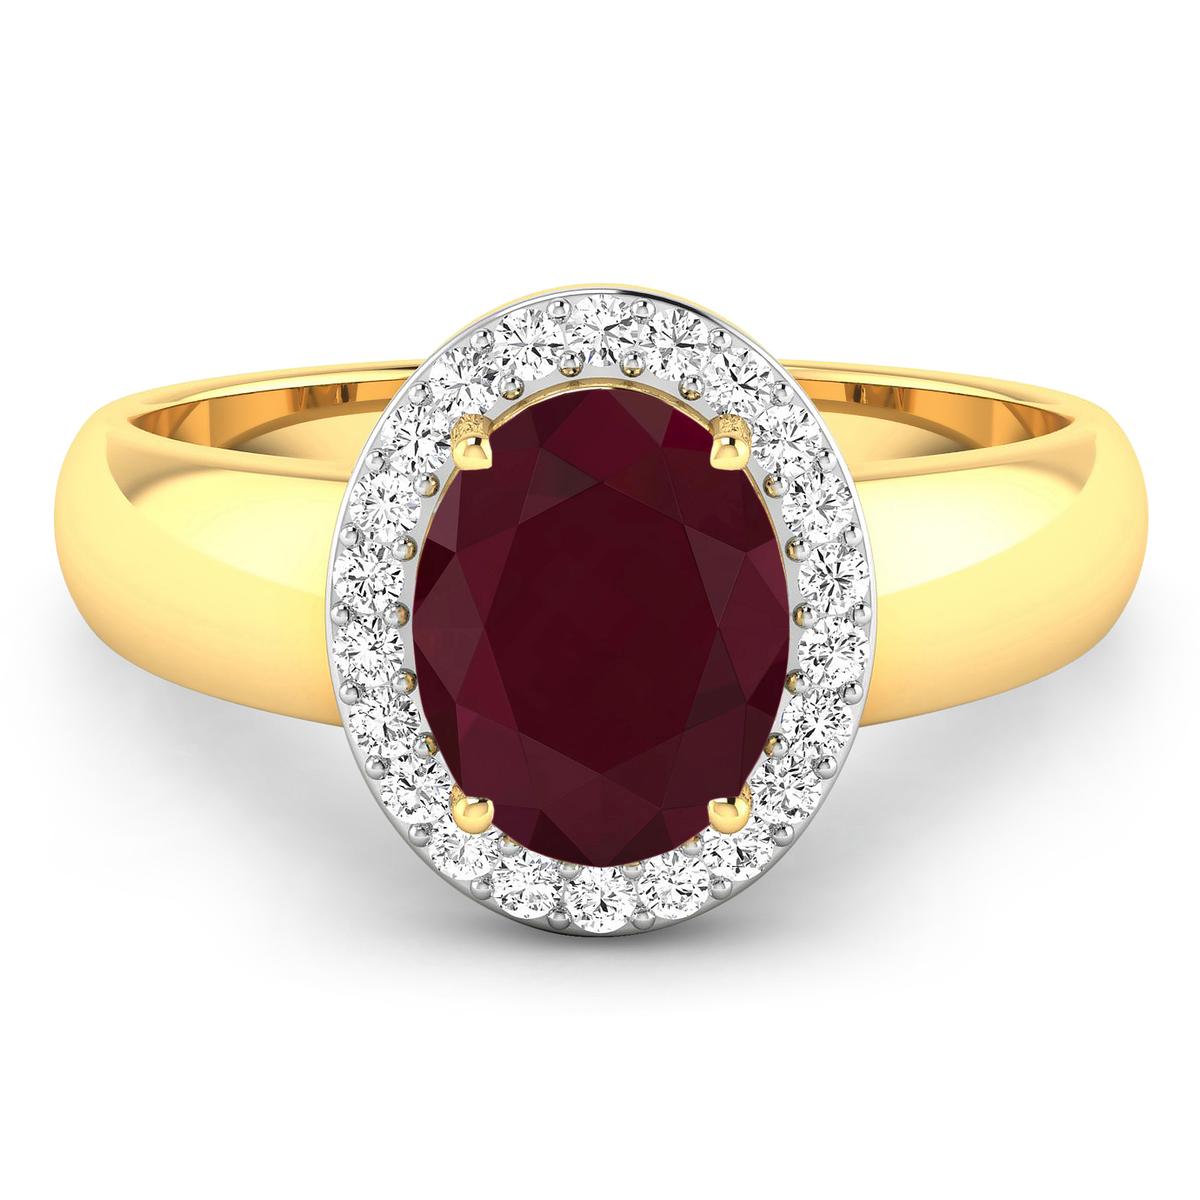 14KT Yellow Gold 2.3ct Ruby and Diamond Ring